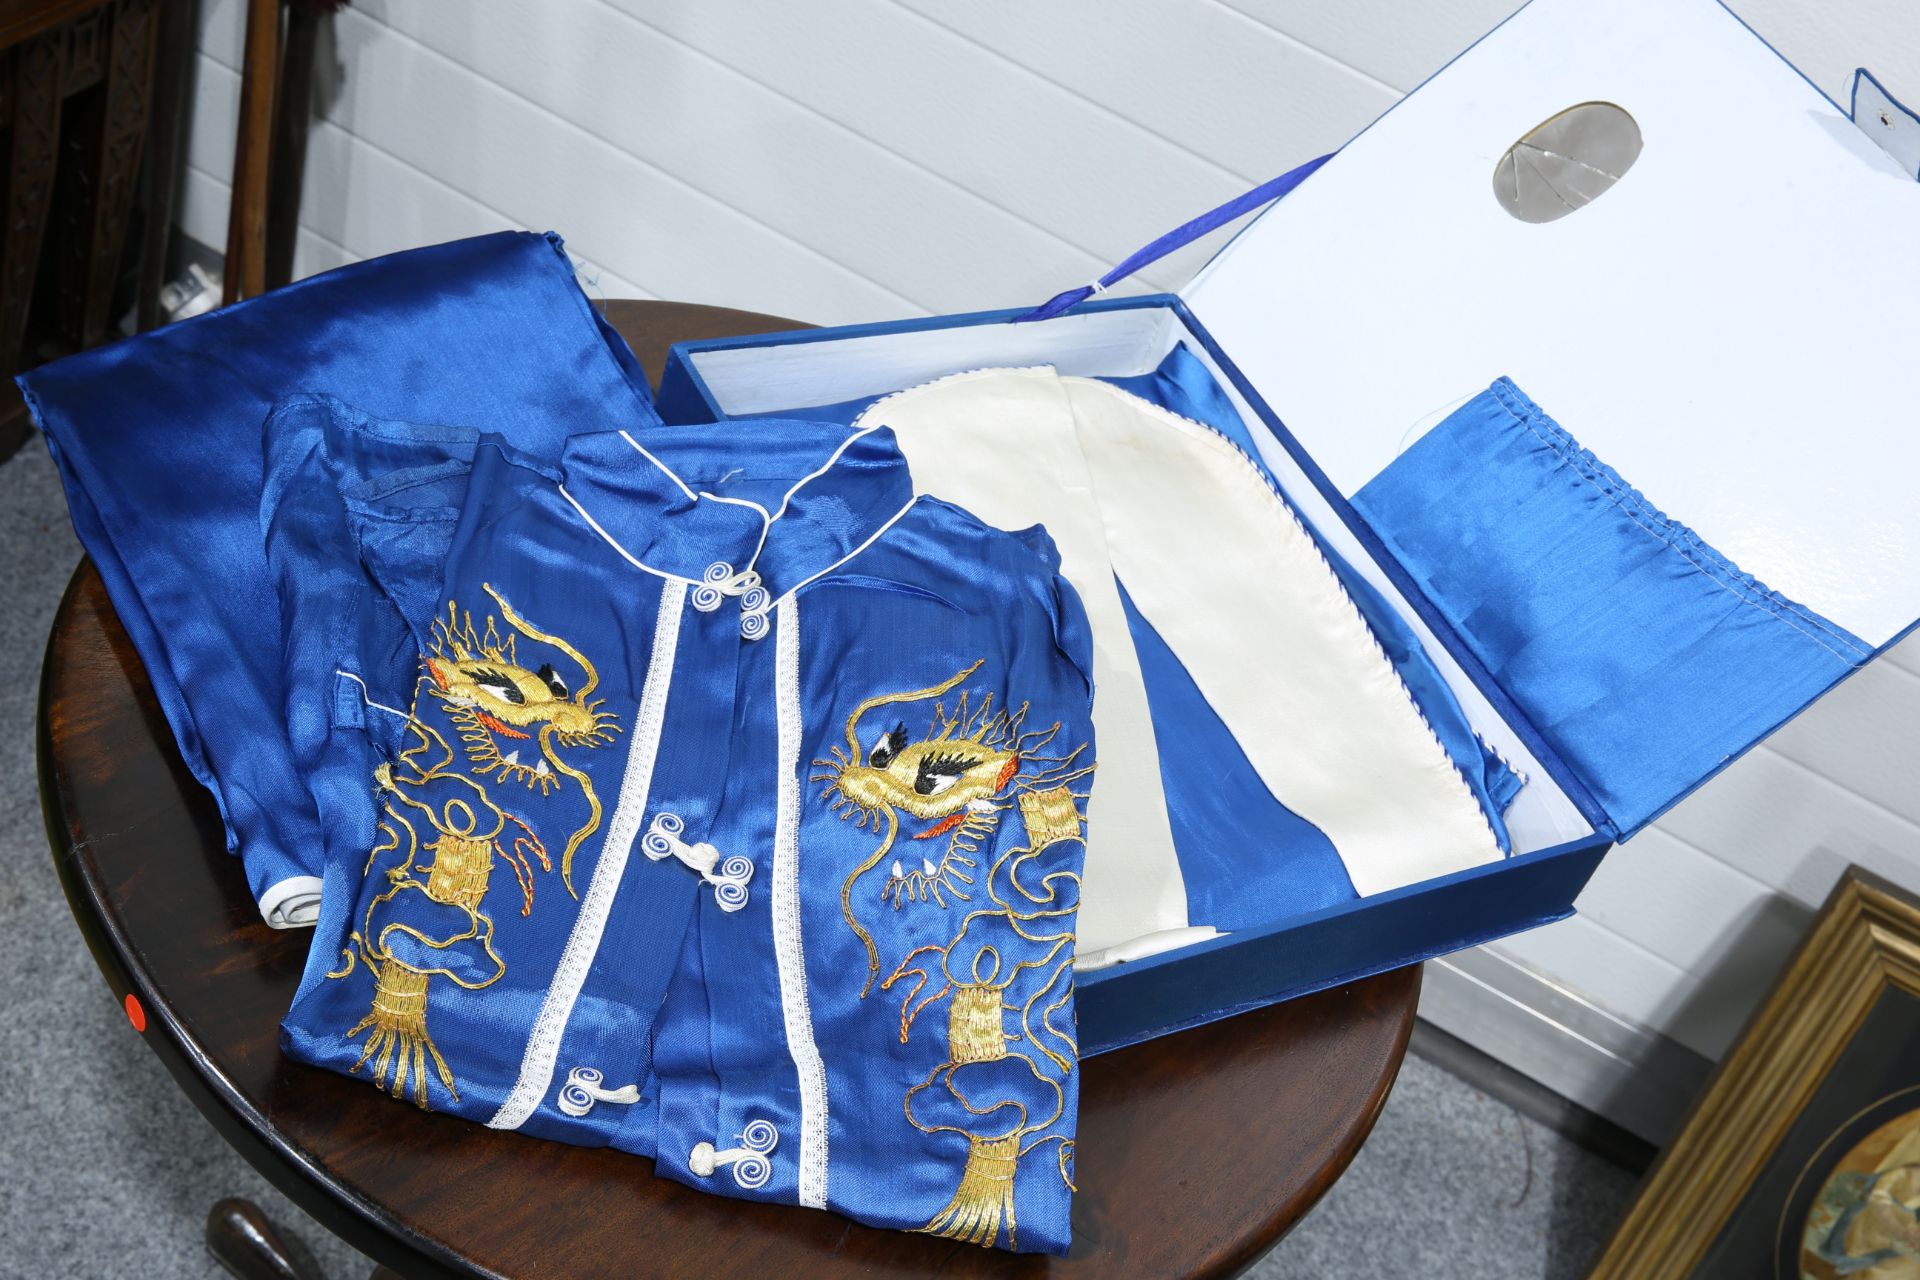 A CHINESE BOXED SET OF BLUE SILK PYJAMAS, GOWN AND SLIPPERS, worked in relief with coloured - Bild 2 aus 2